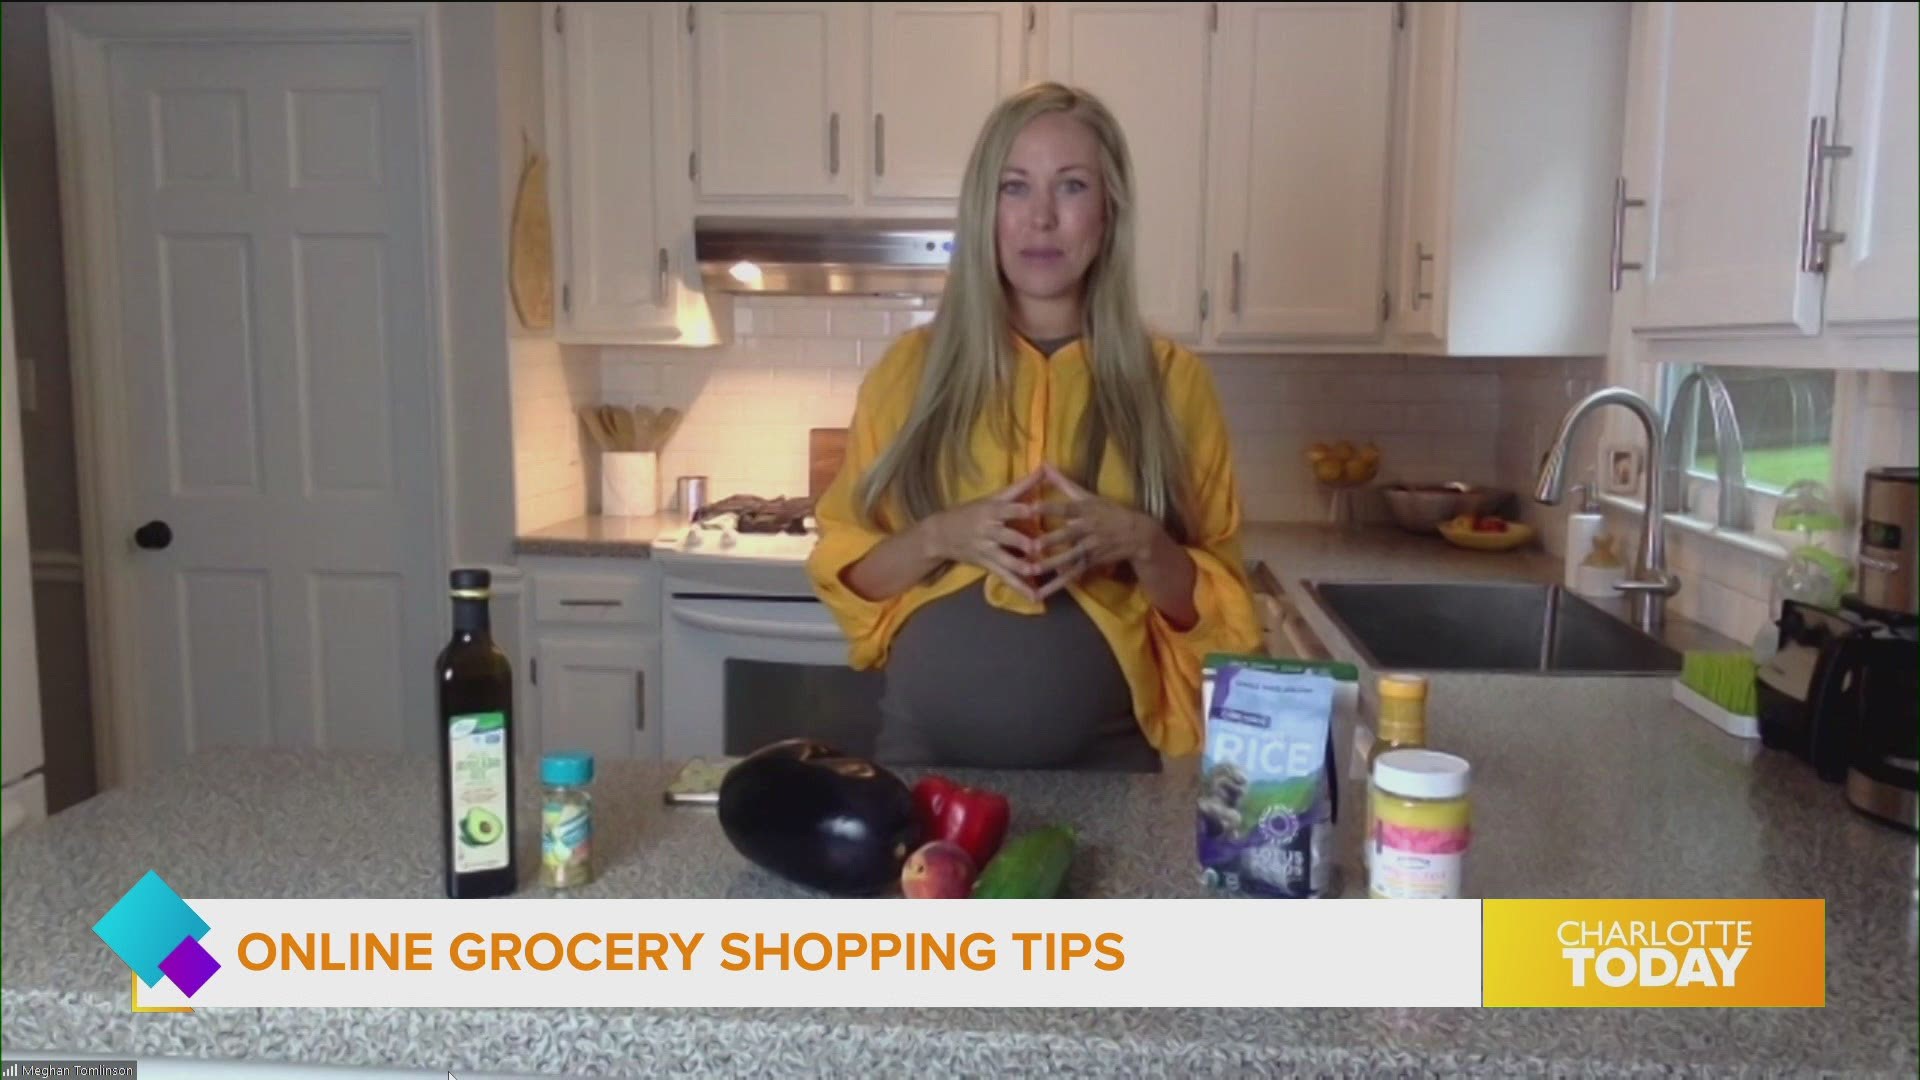 Shopping for groceries is easy when you do it online.